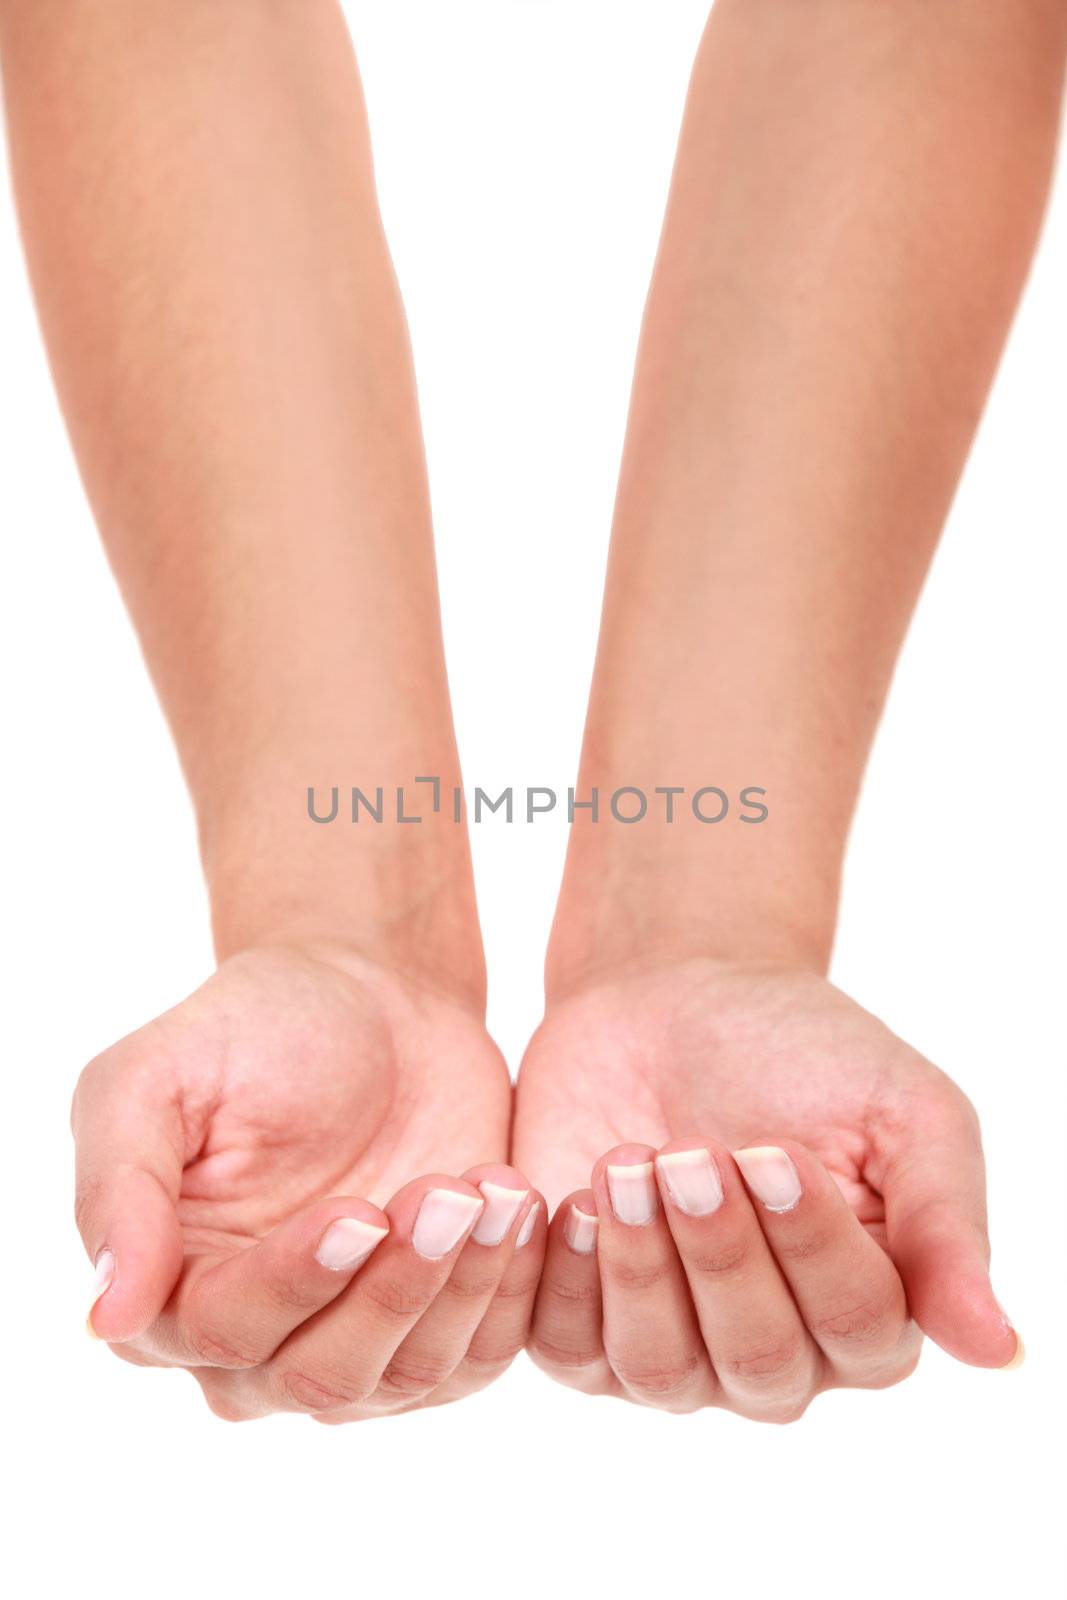 Hands in cupping position by phovoir